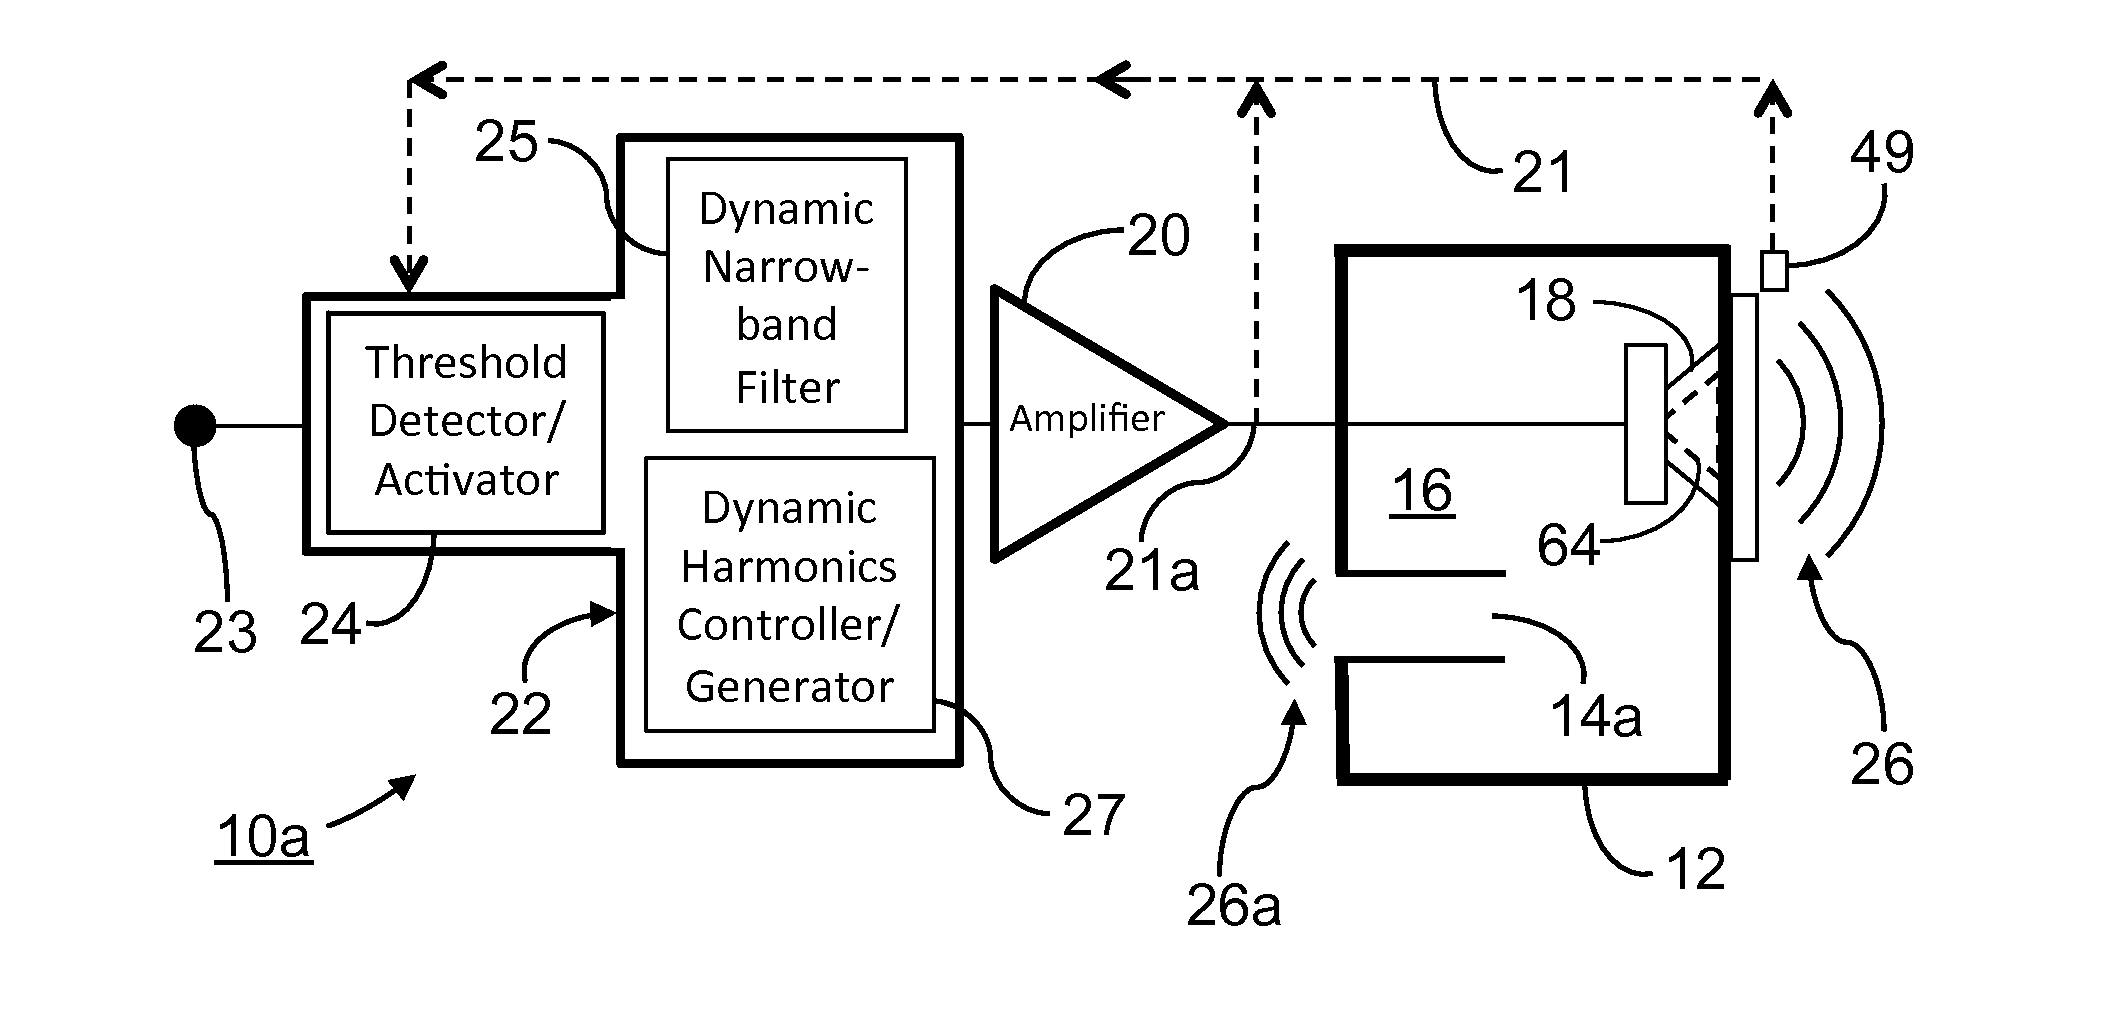 Loudspeaker Enclosure System With Signal Processor For Enhanced Perception Of Low Frequency Output